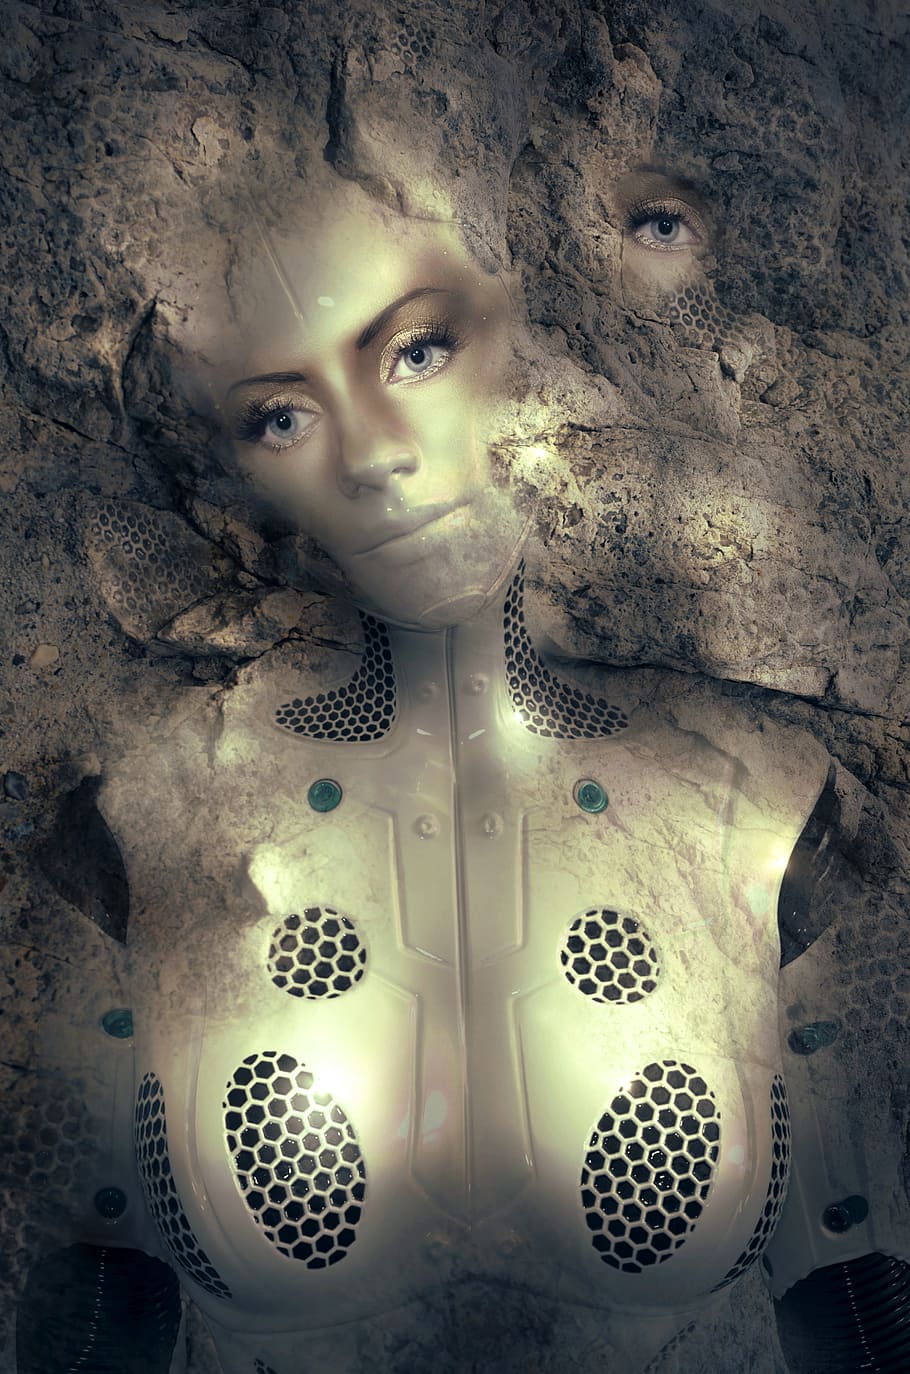 fantasy, android, stone, female, artificial, scifi, composing, photo montage, mystical, surreal